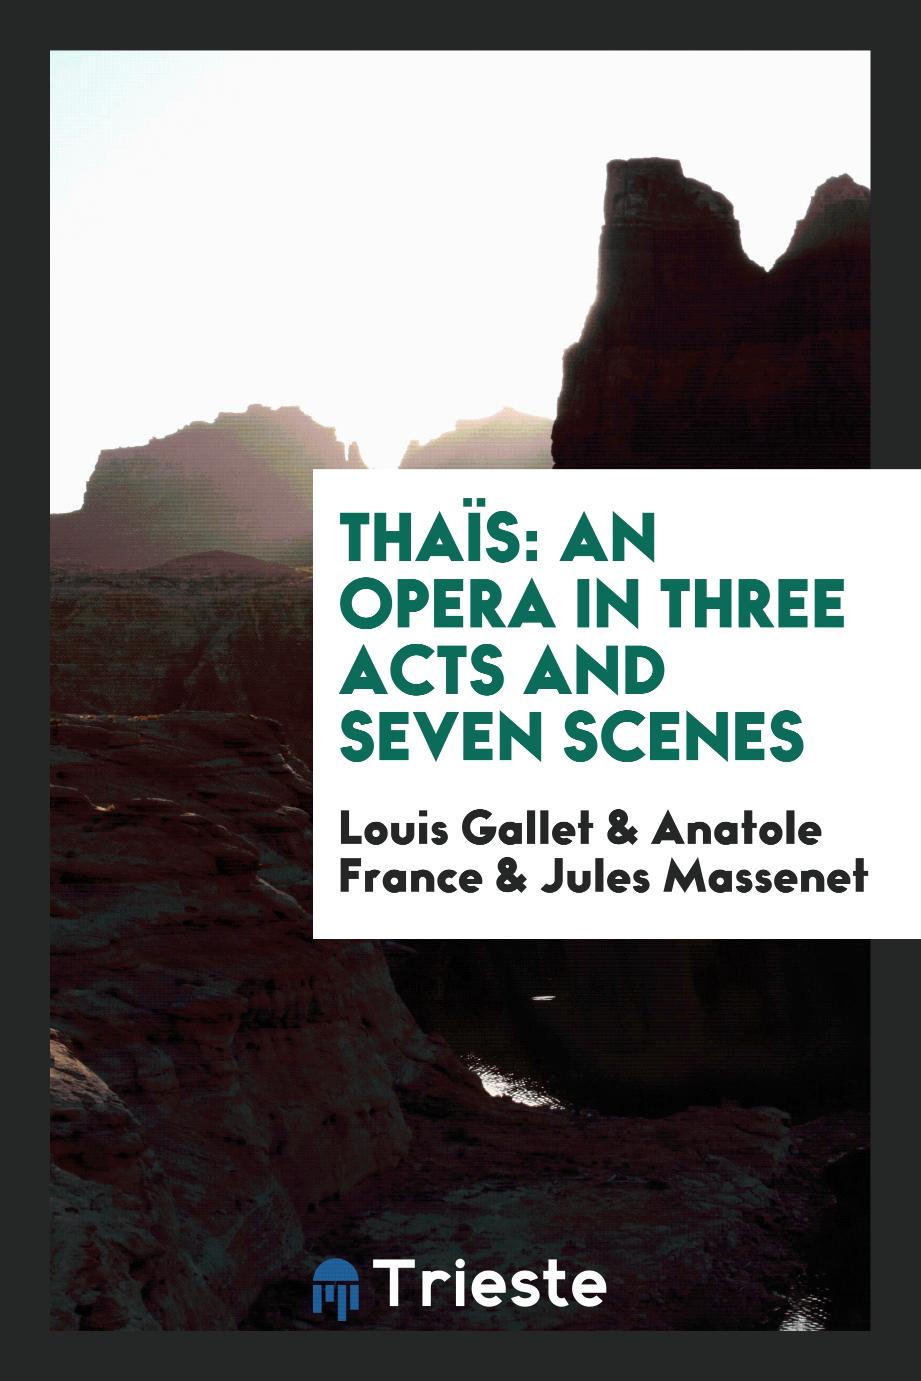 Thaïs: An Opera in Three Acts and Seven Scenes